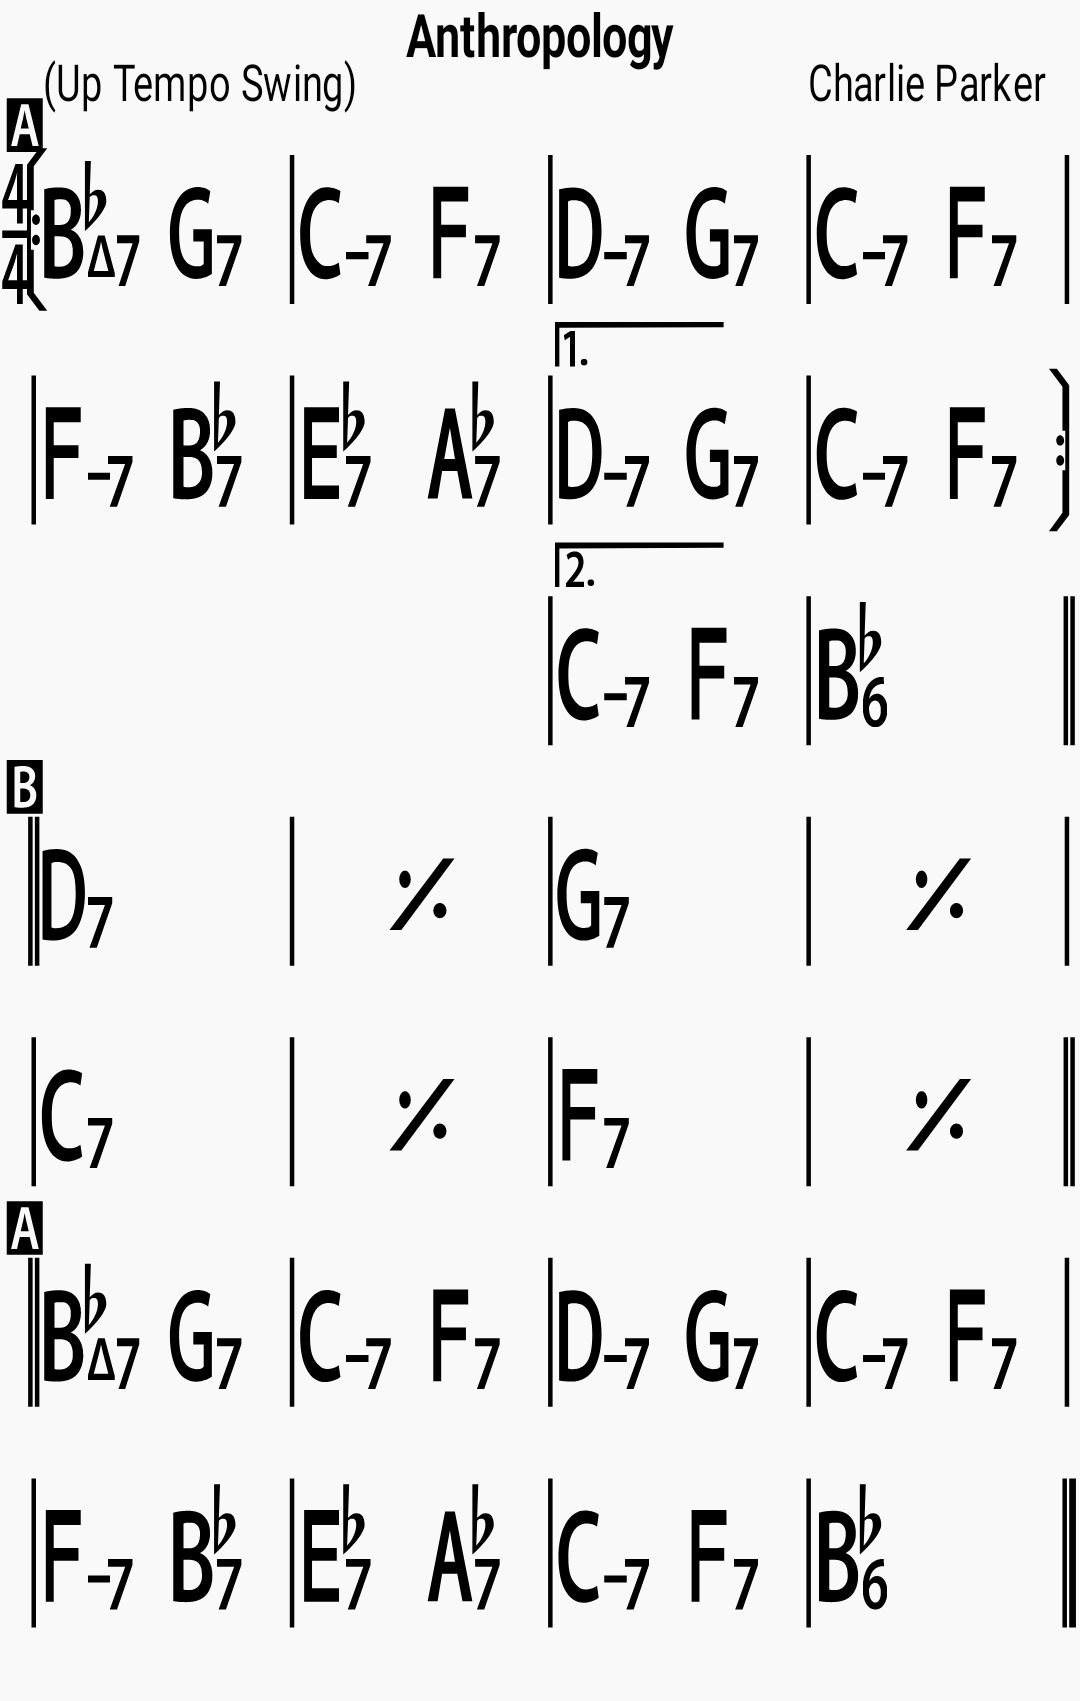 Chord chart for the jazz standard Anthropology